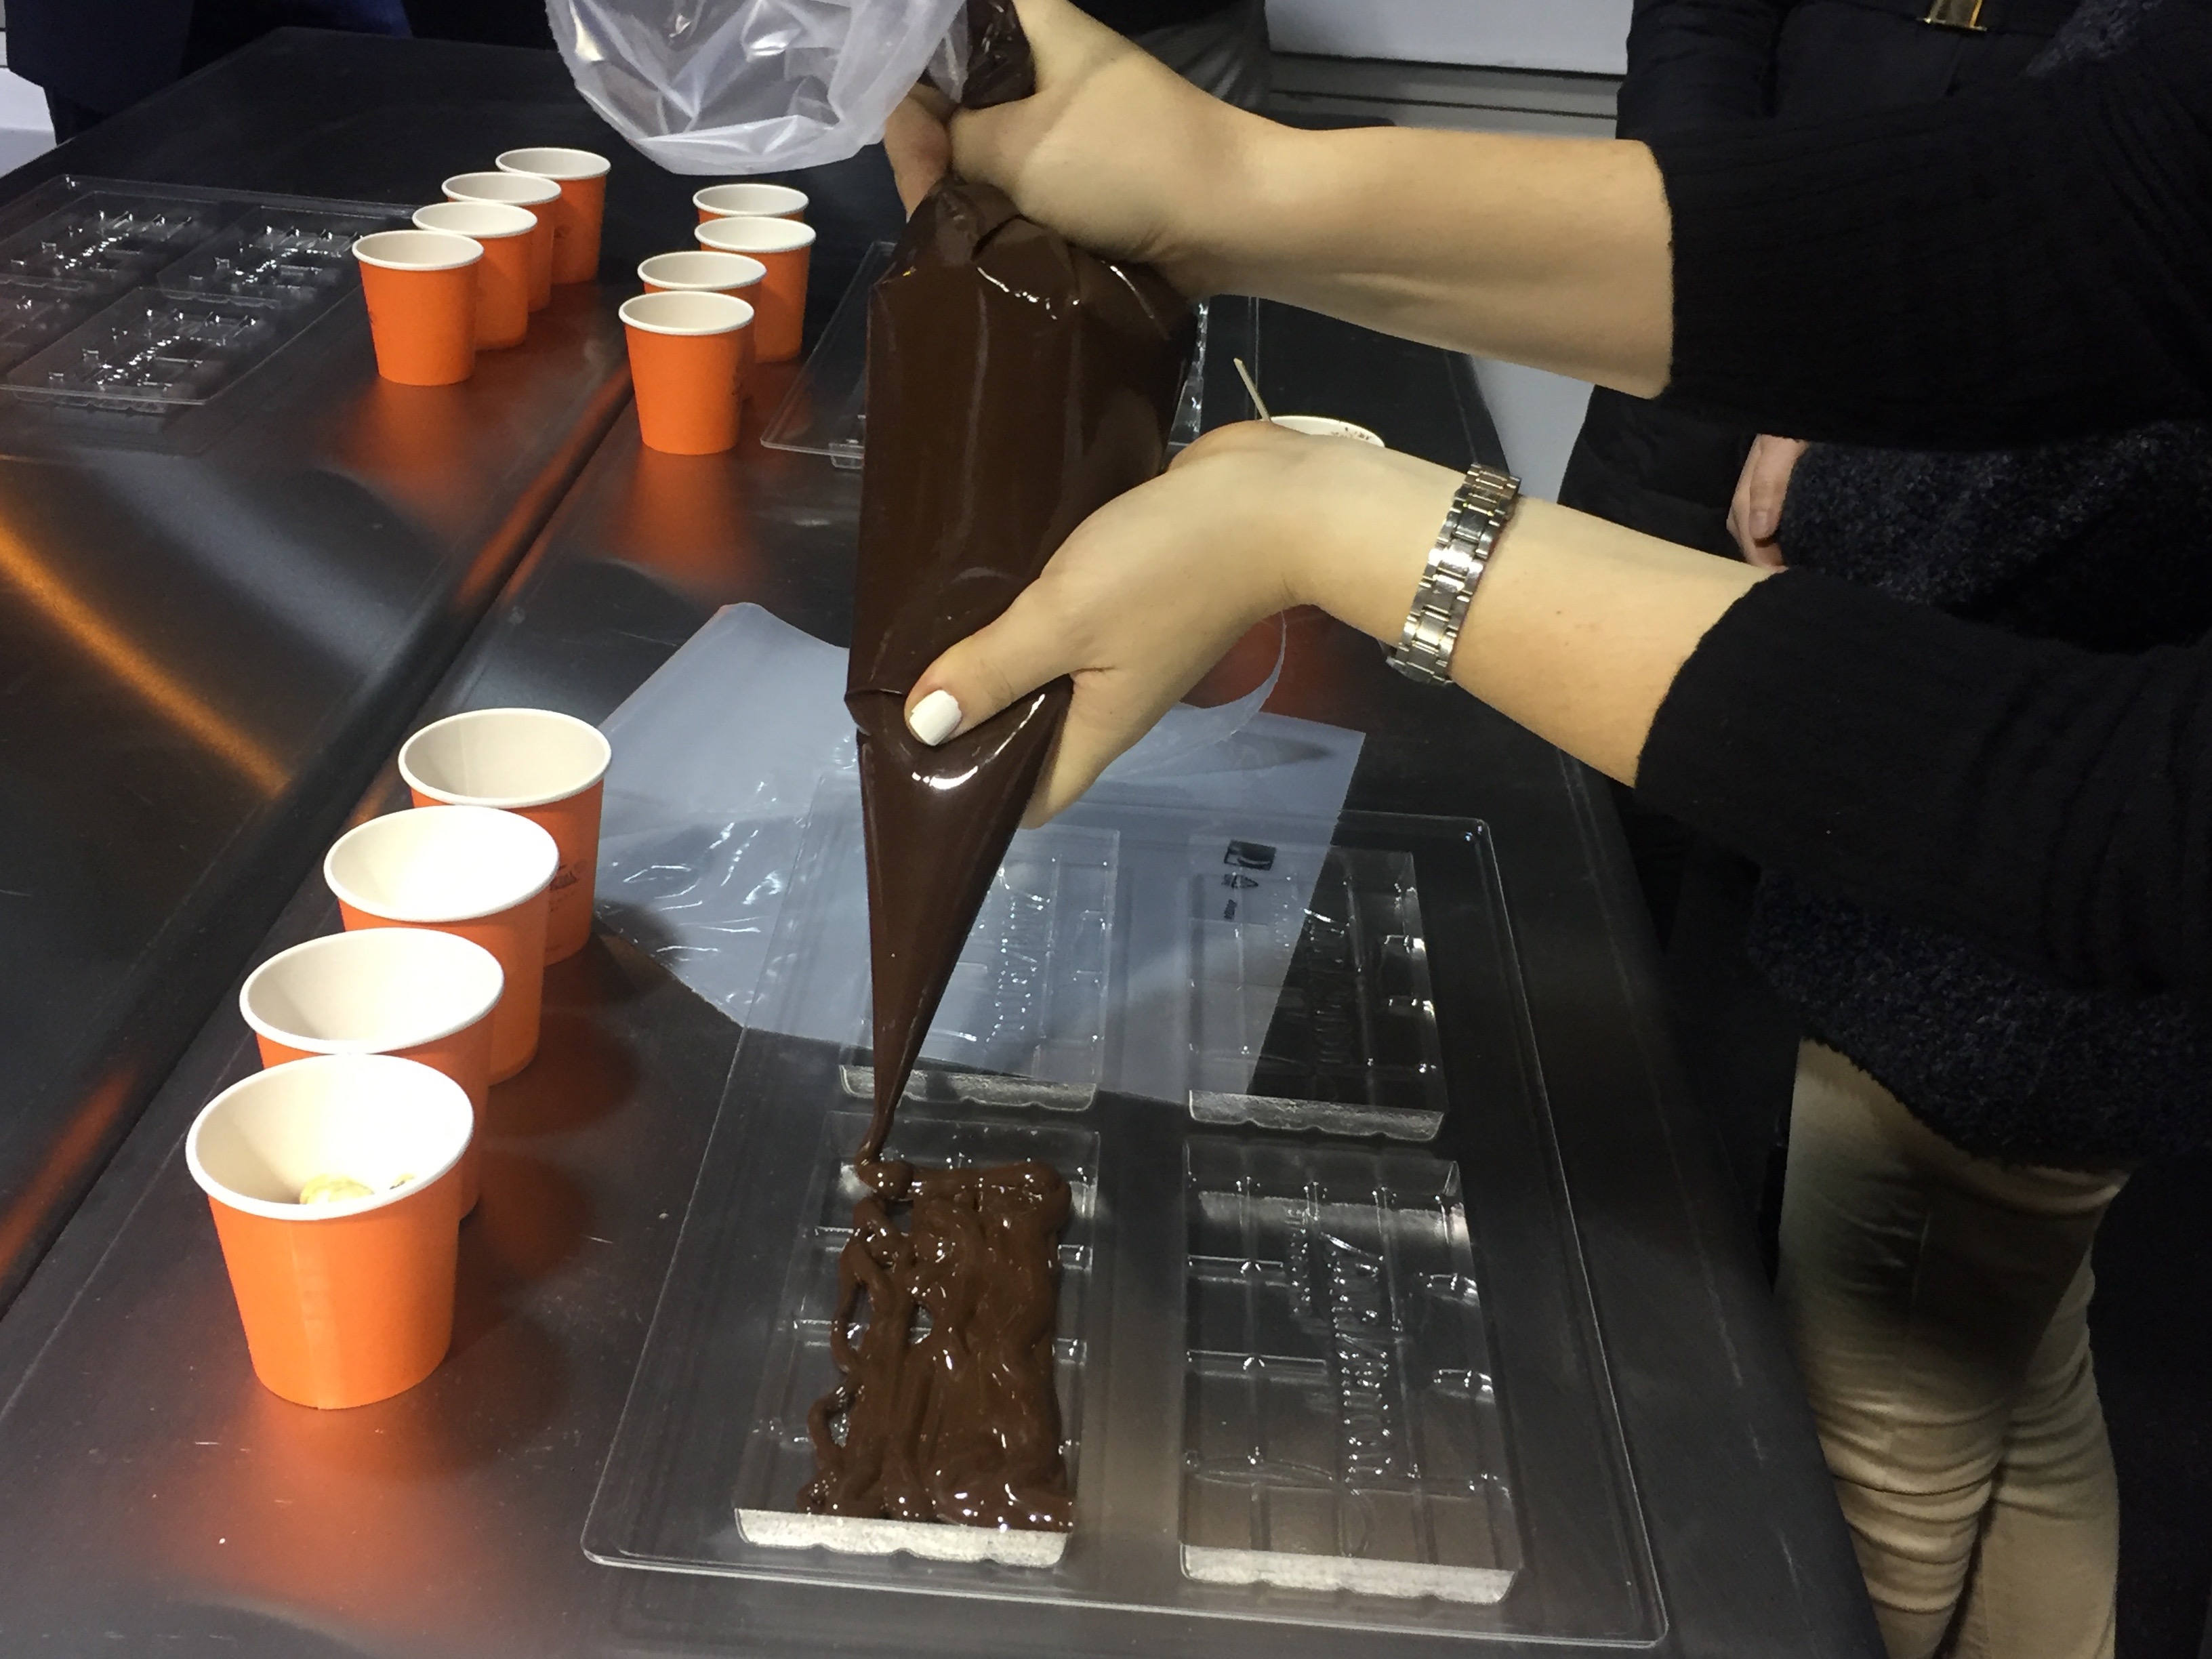 Visitors are guided through the process of filling molds for chocolate bars.